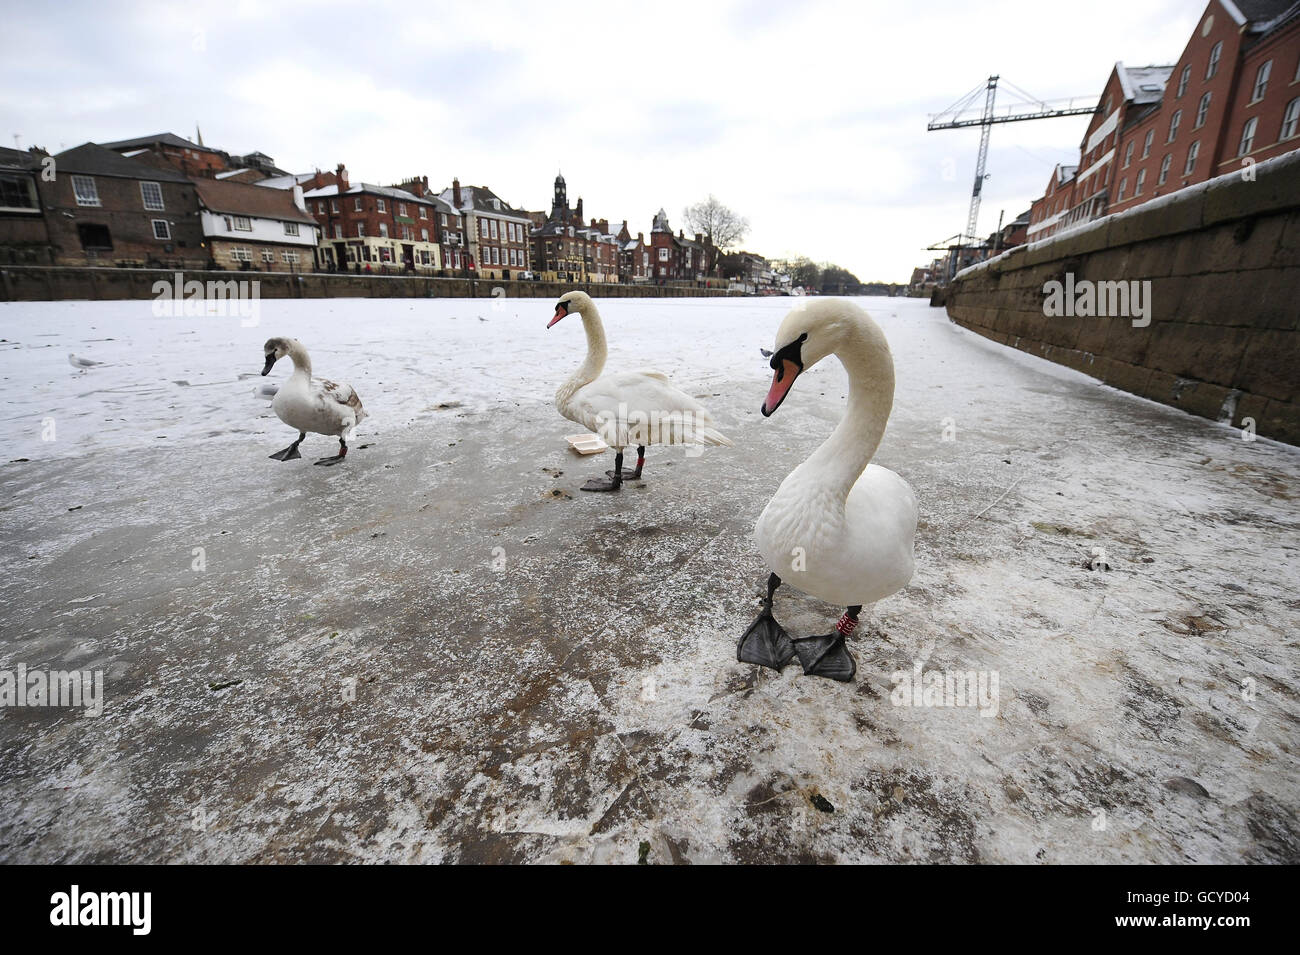 The River Ouse completely frozen over in the city of York today as the deep freeze in the UK continues. Stock Photo